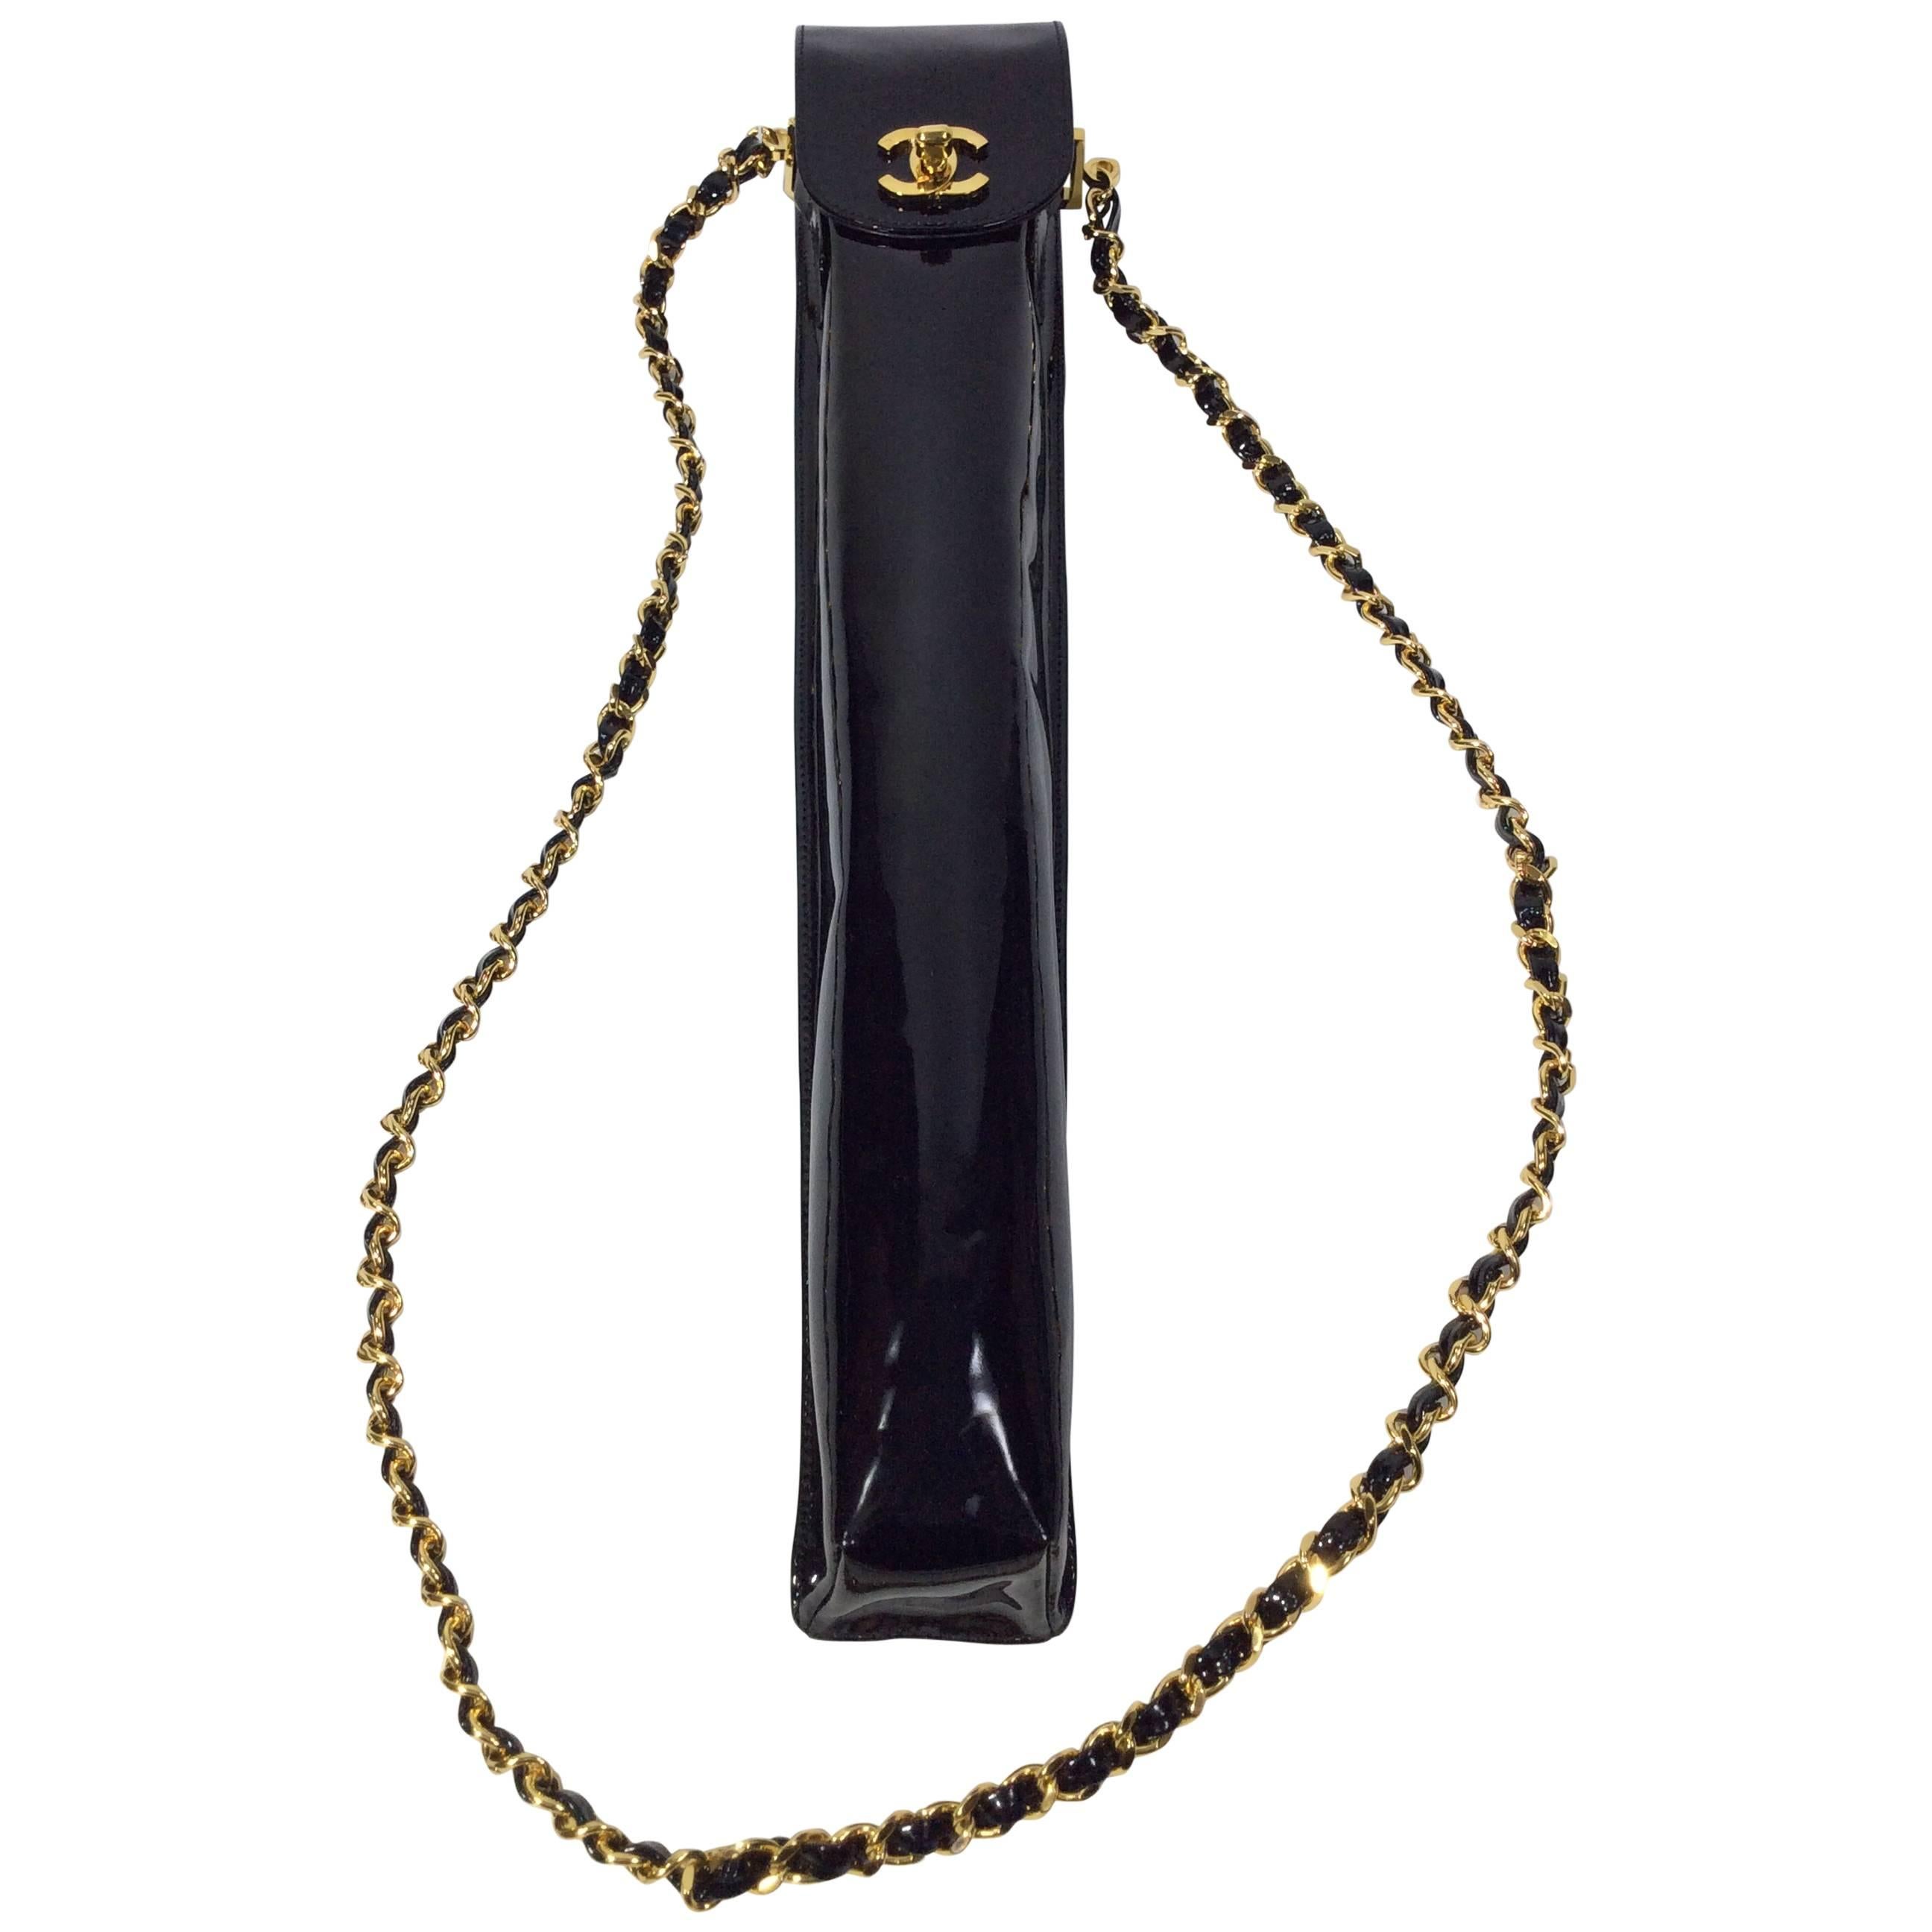 Chanel Black Patent Leather Umbrella Carrier